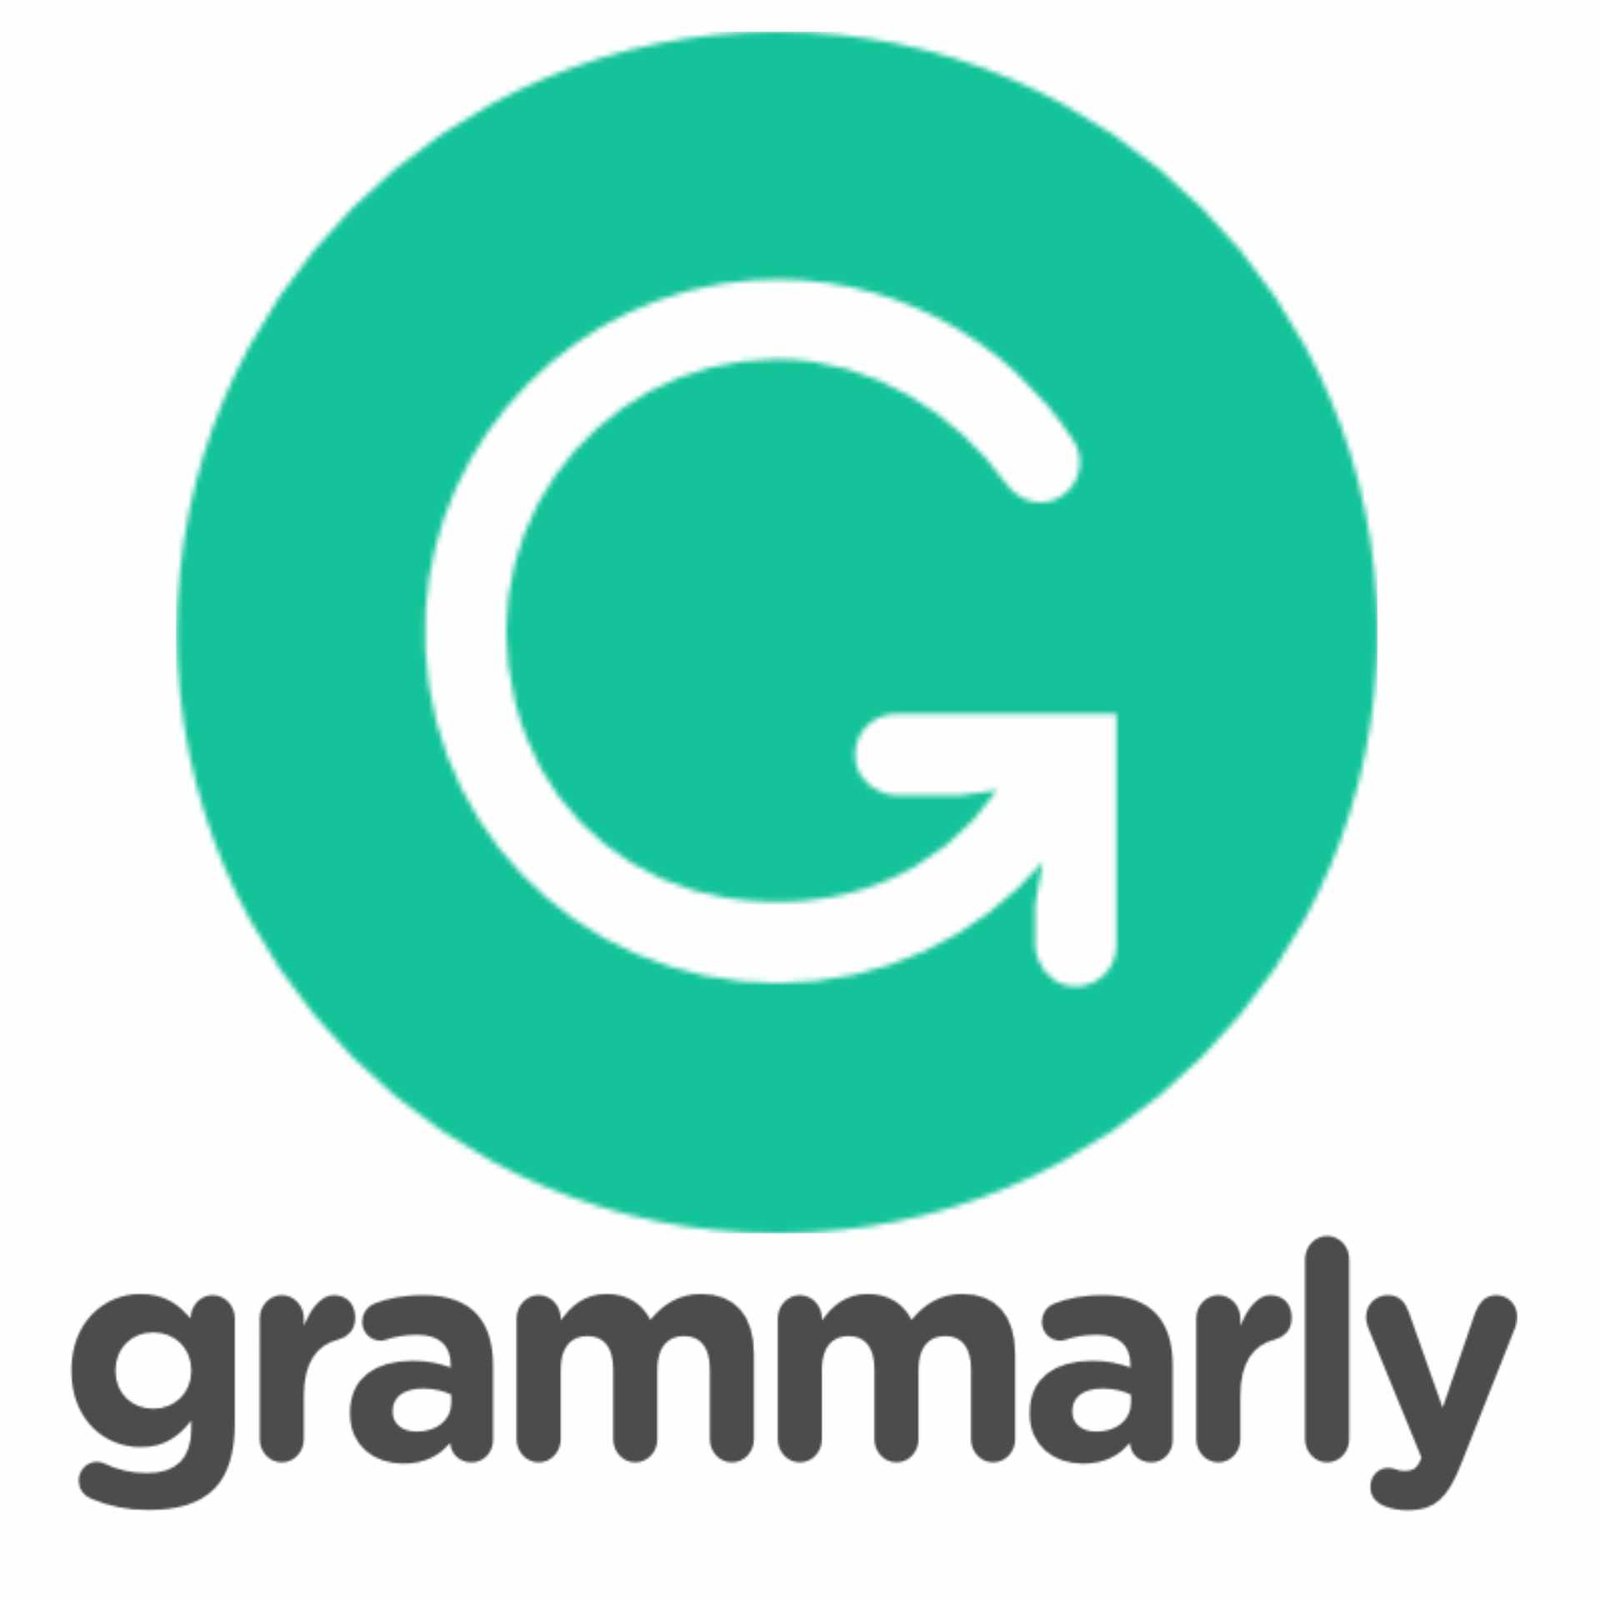 Grammarly 1.0.20.325 with License Key Crack Free Download 2023